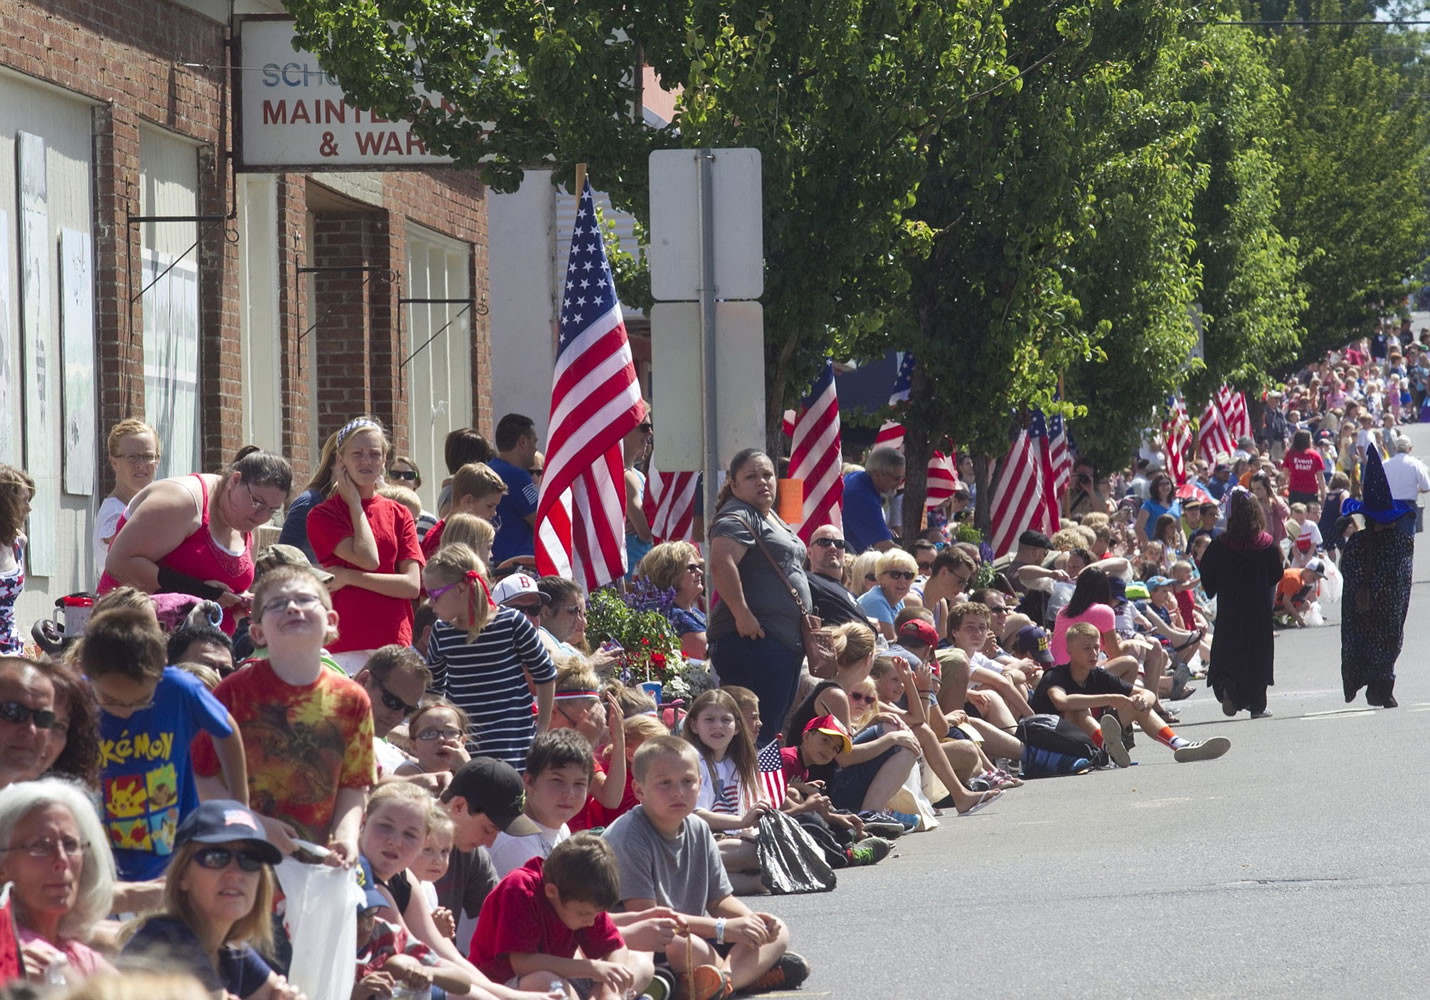 Scores of visitors line the streets to watch the Independence Day parade in Ridgefield on July 4.